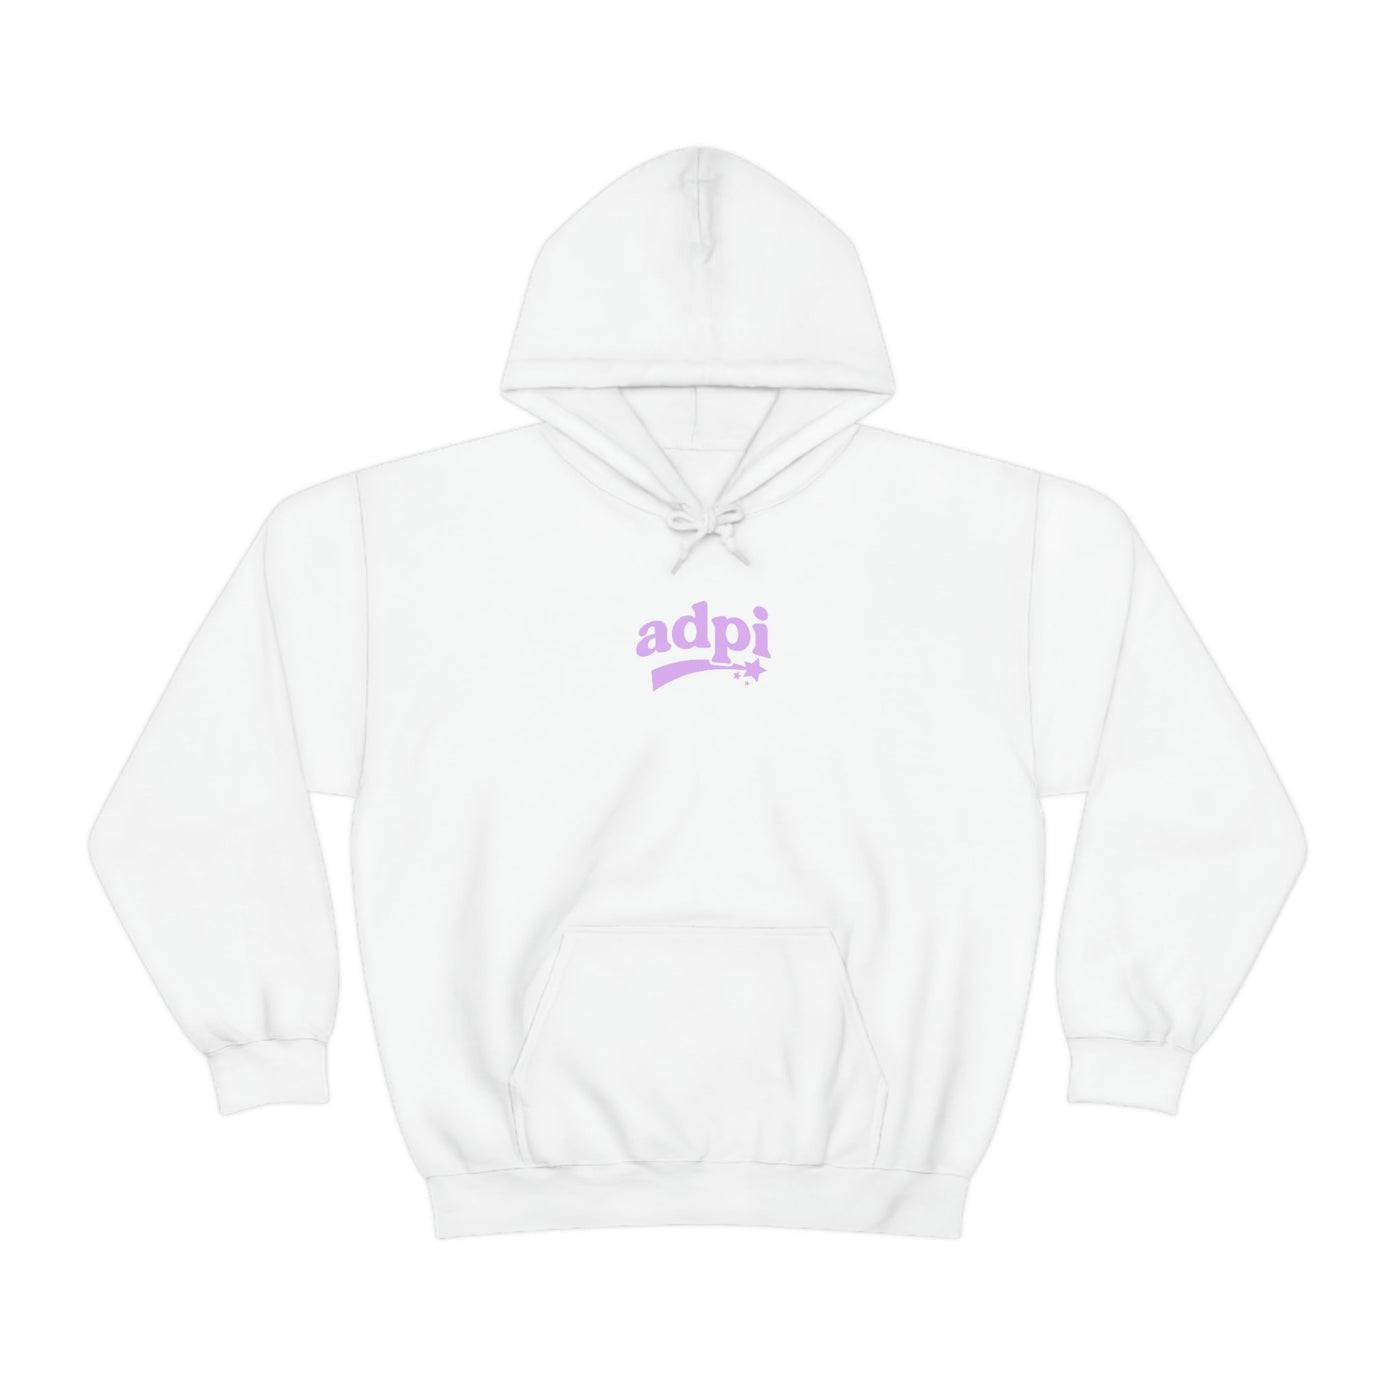 Alpha Delta Pi Planet Hoodie | Be Kind to the Planet Trendy Sorority Hoodie